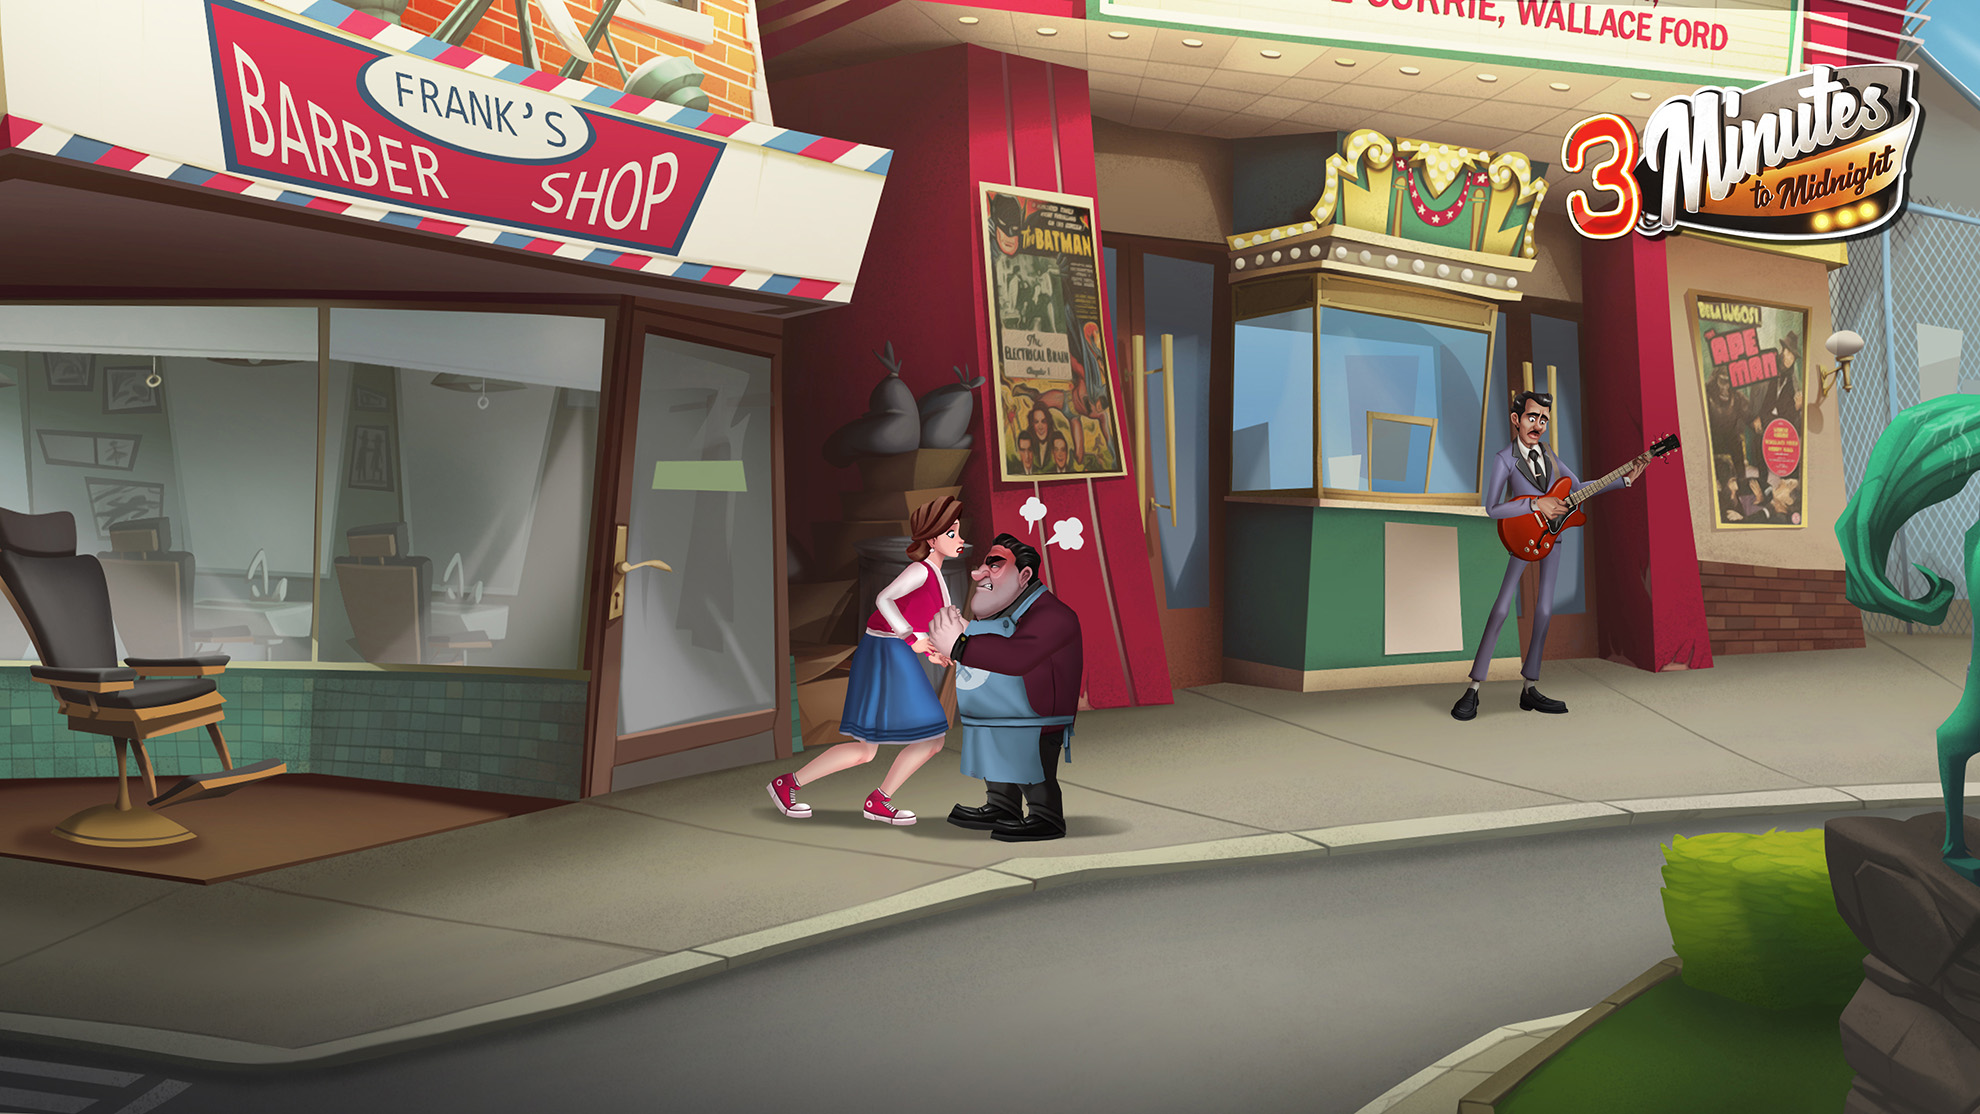 3 Minutes to Midnight - A Comedy Graphic Adventure screenshot